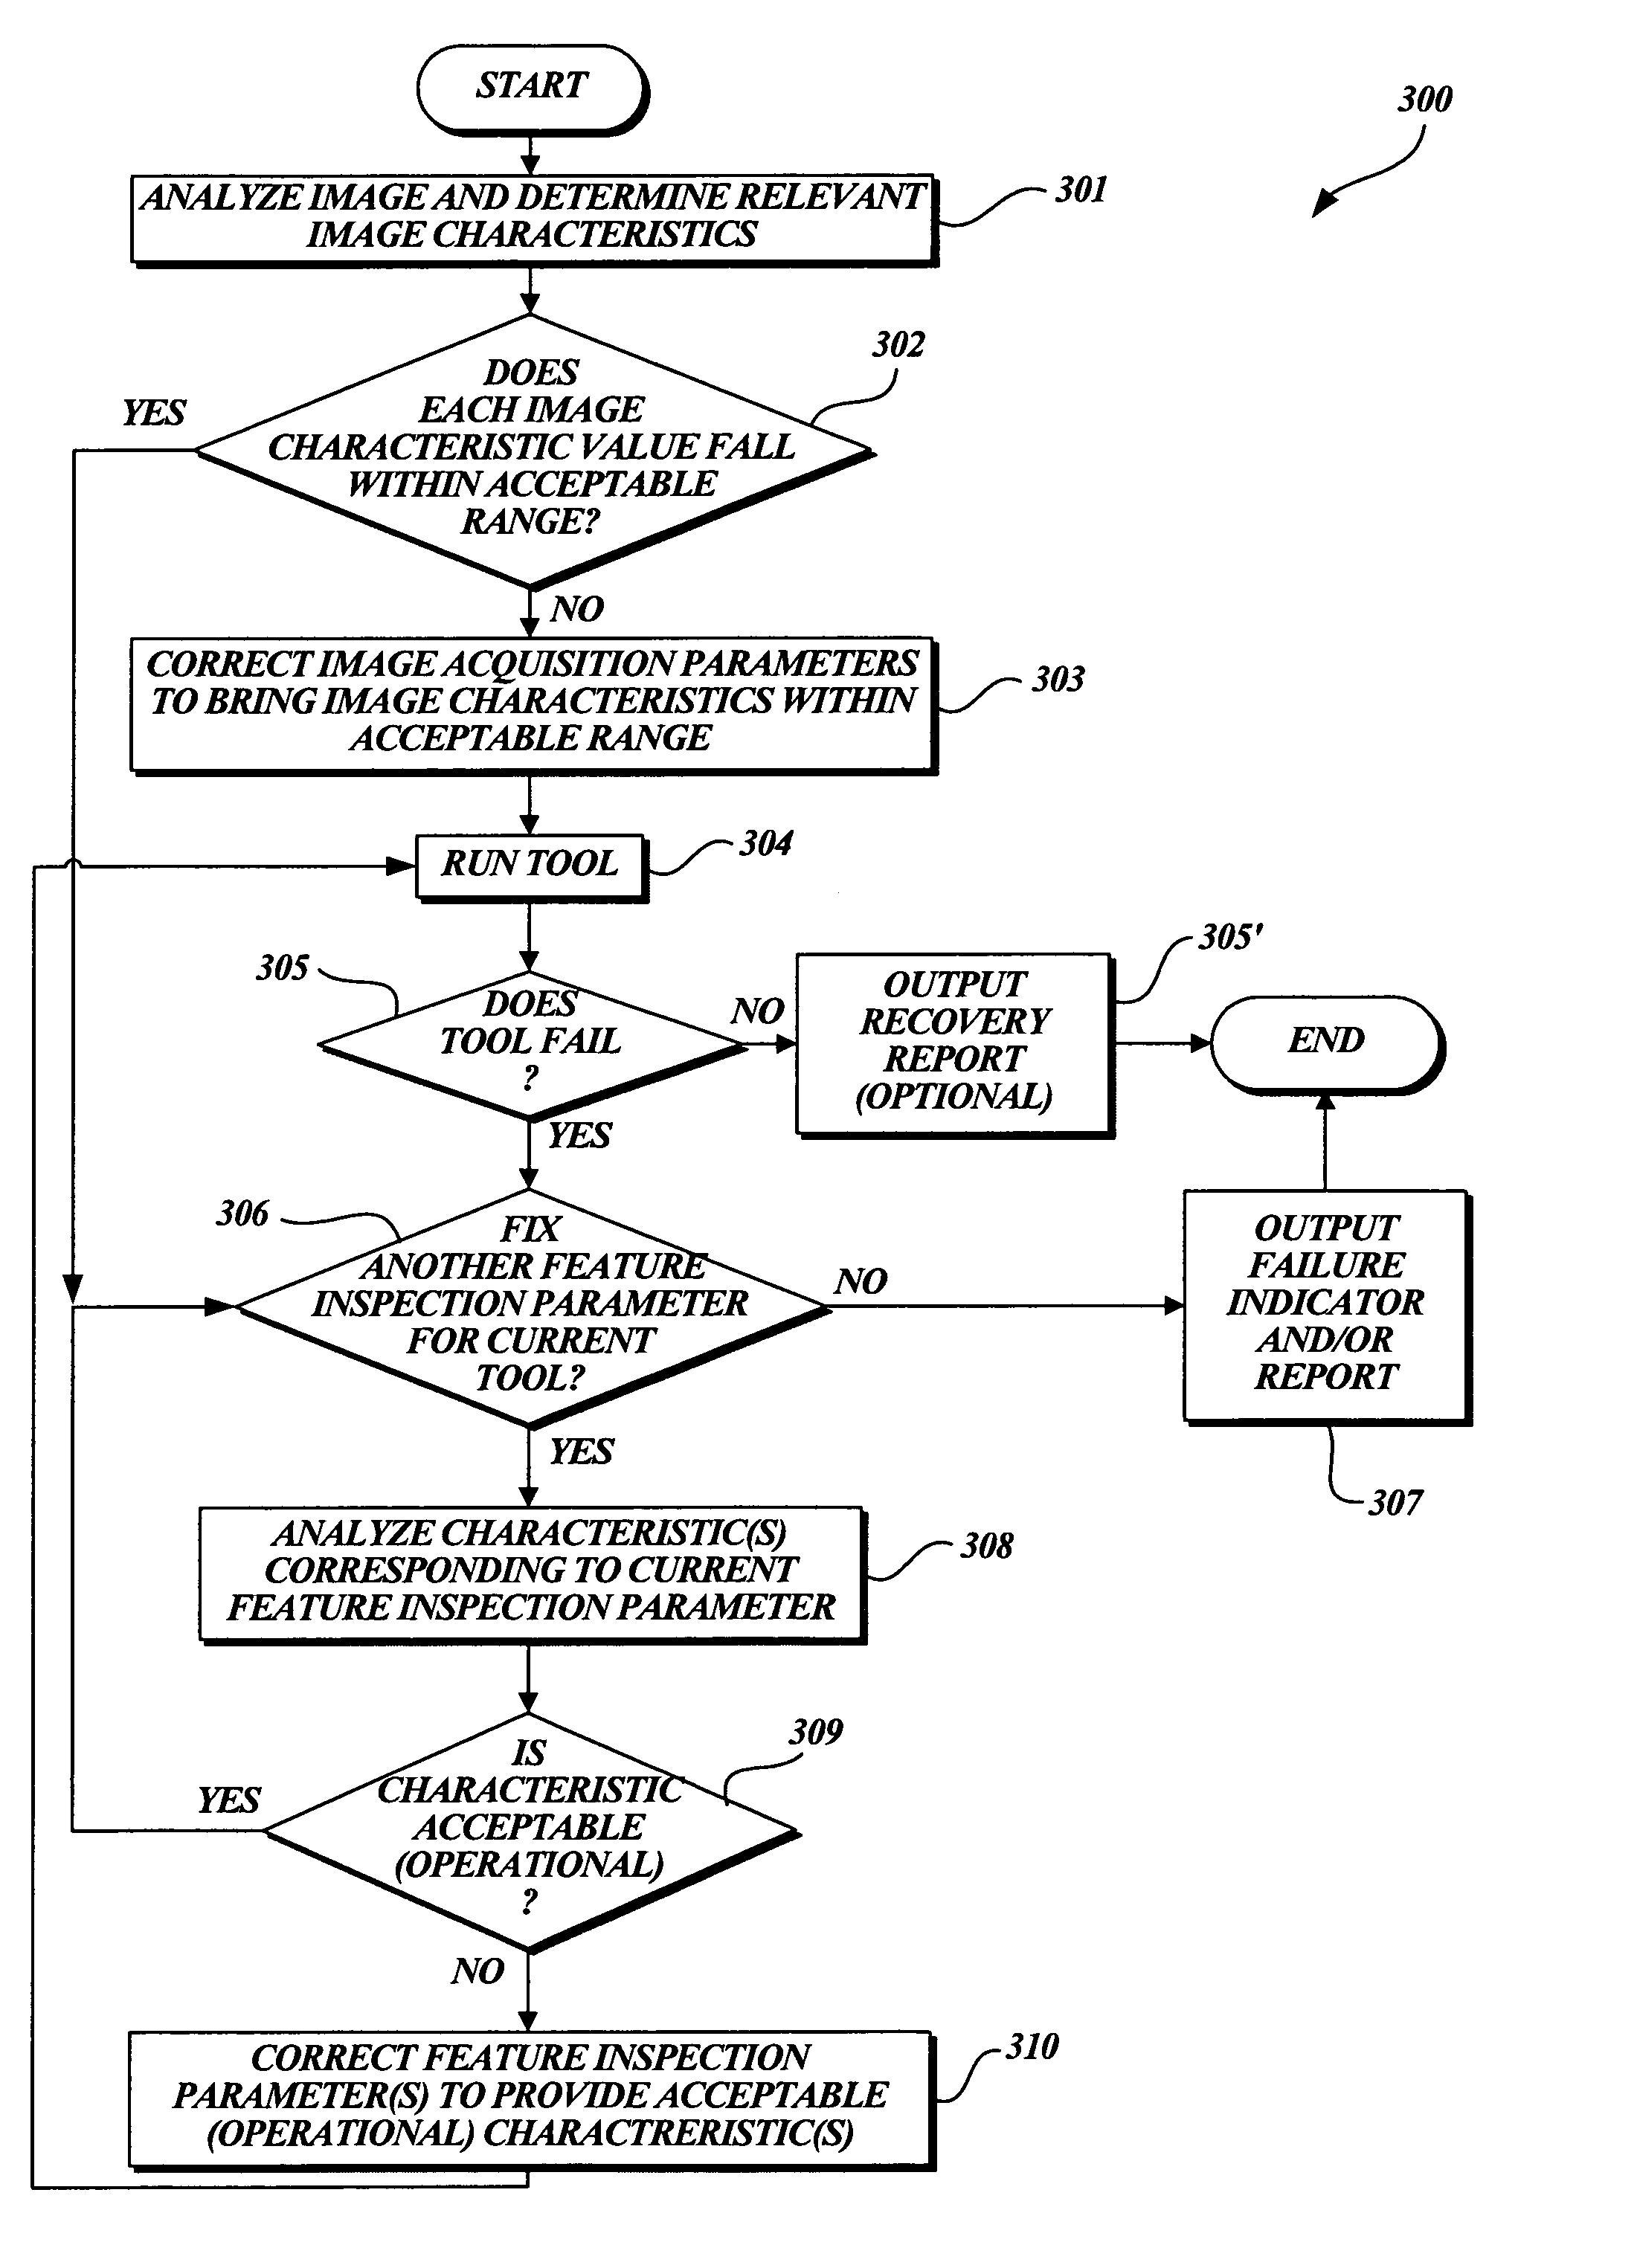 System and method for automatically recovering video tools in a vision system